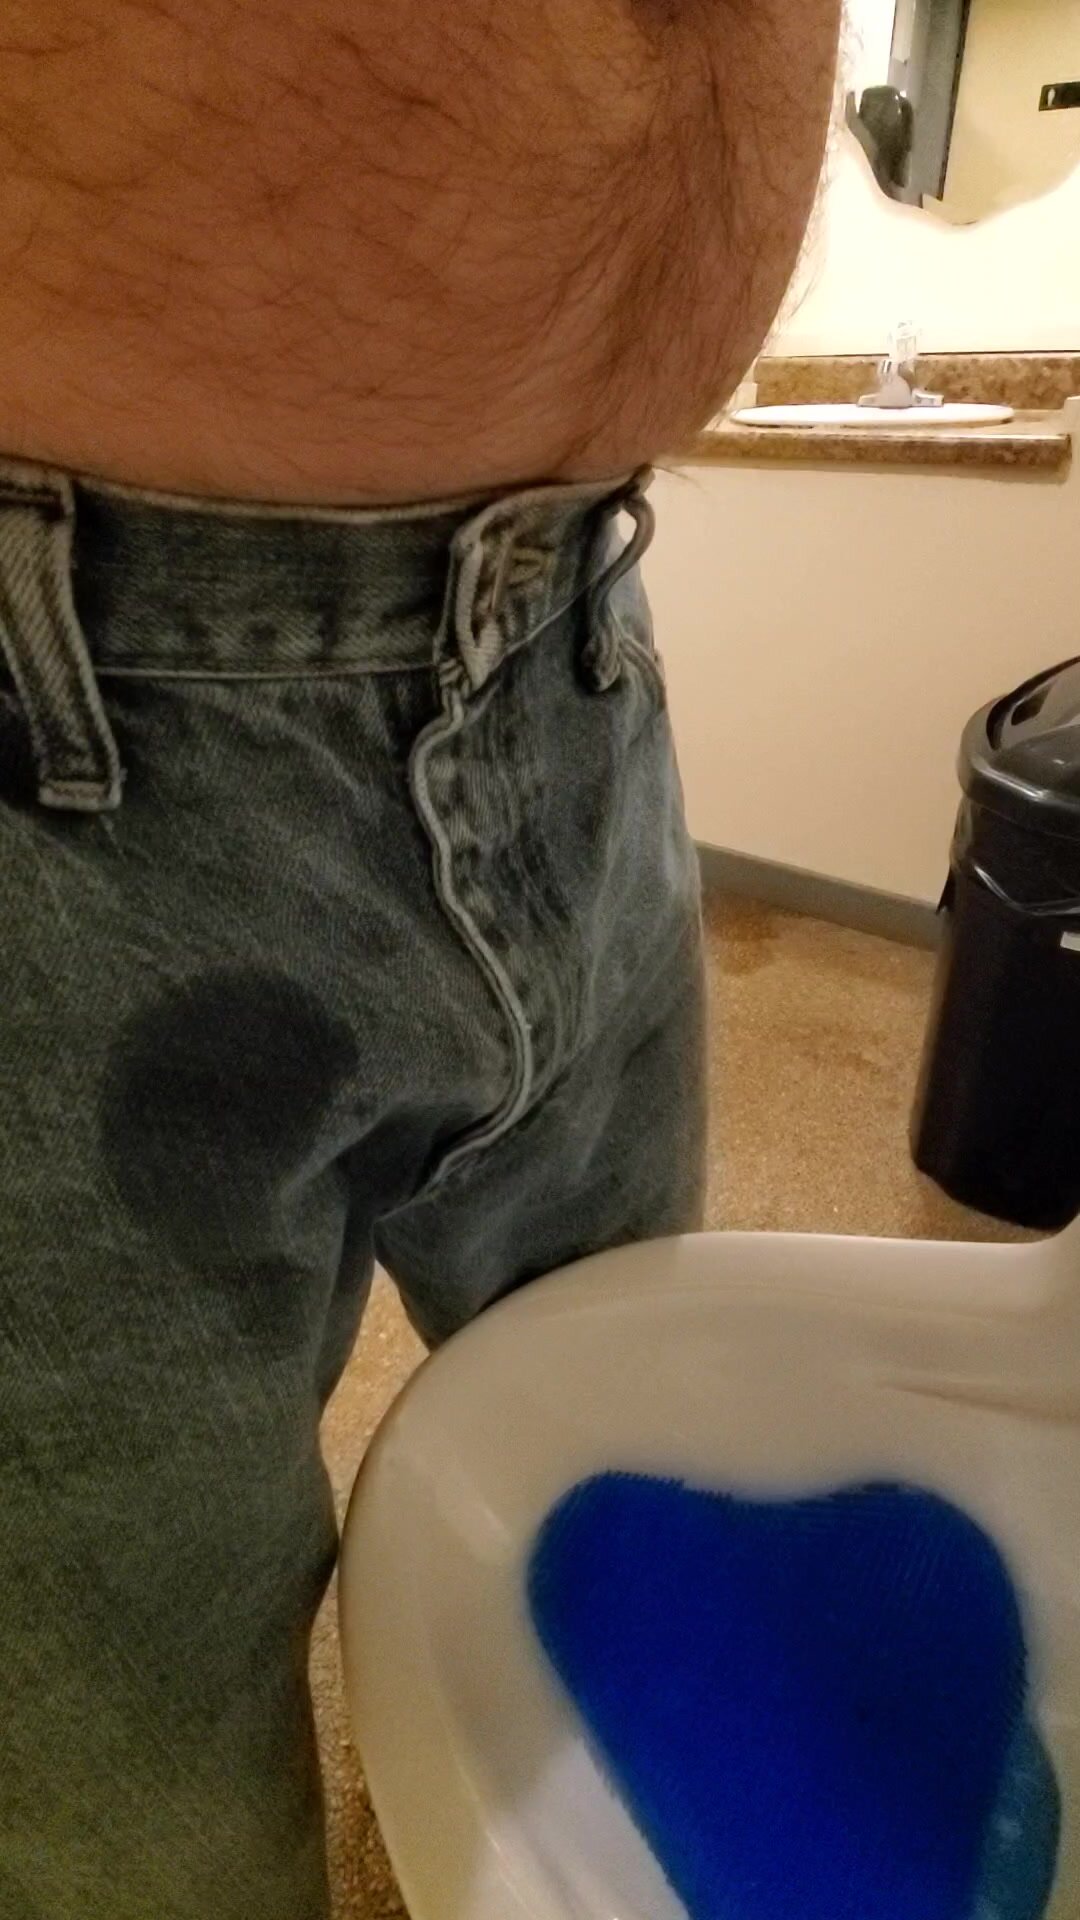 Soaked jeans in public camp restroom